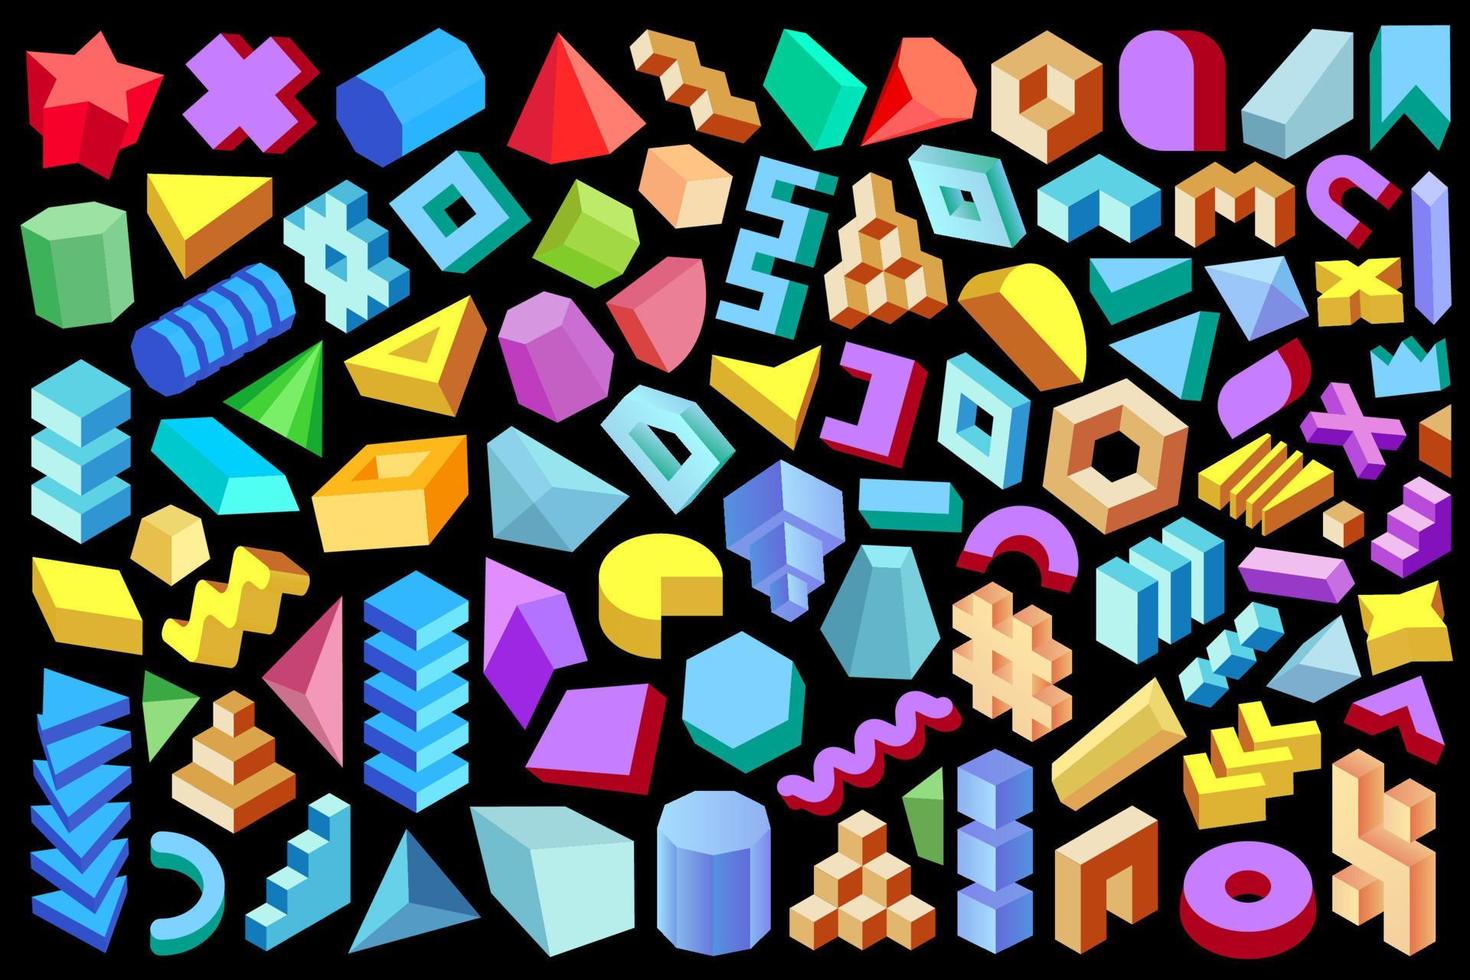 3D geometric design elements collection. Set of abstract geometric shapes, forms and figures isolated on black background. vector